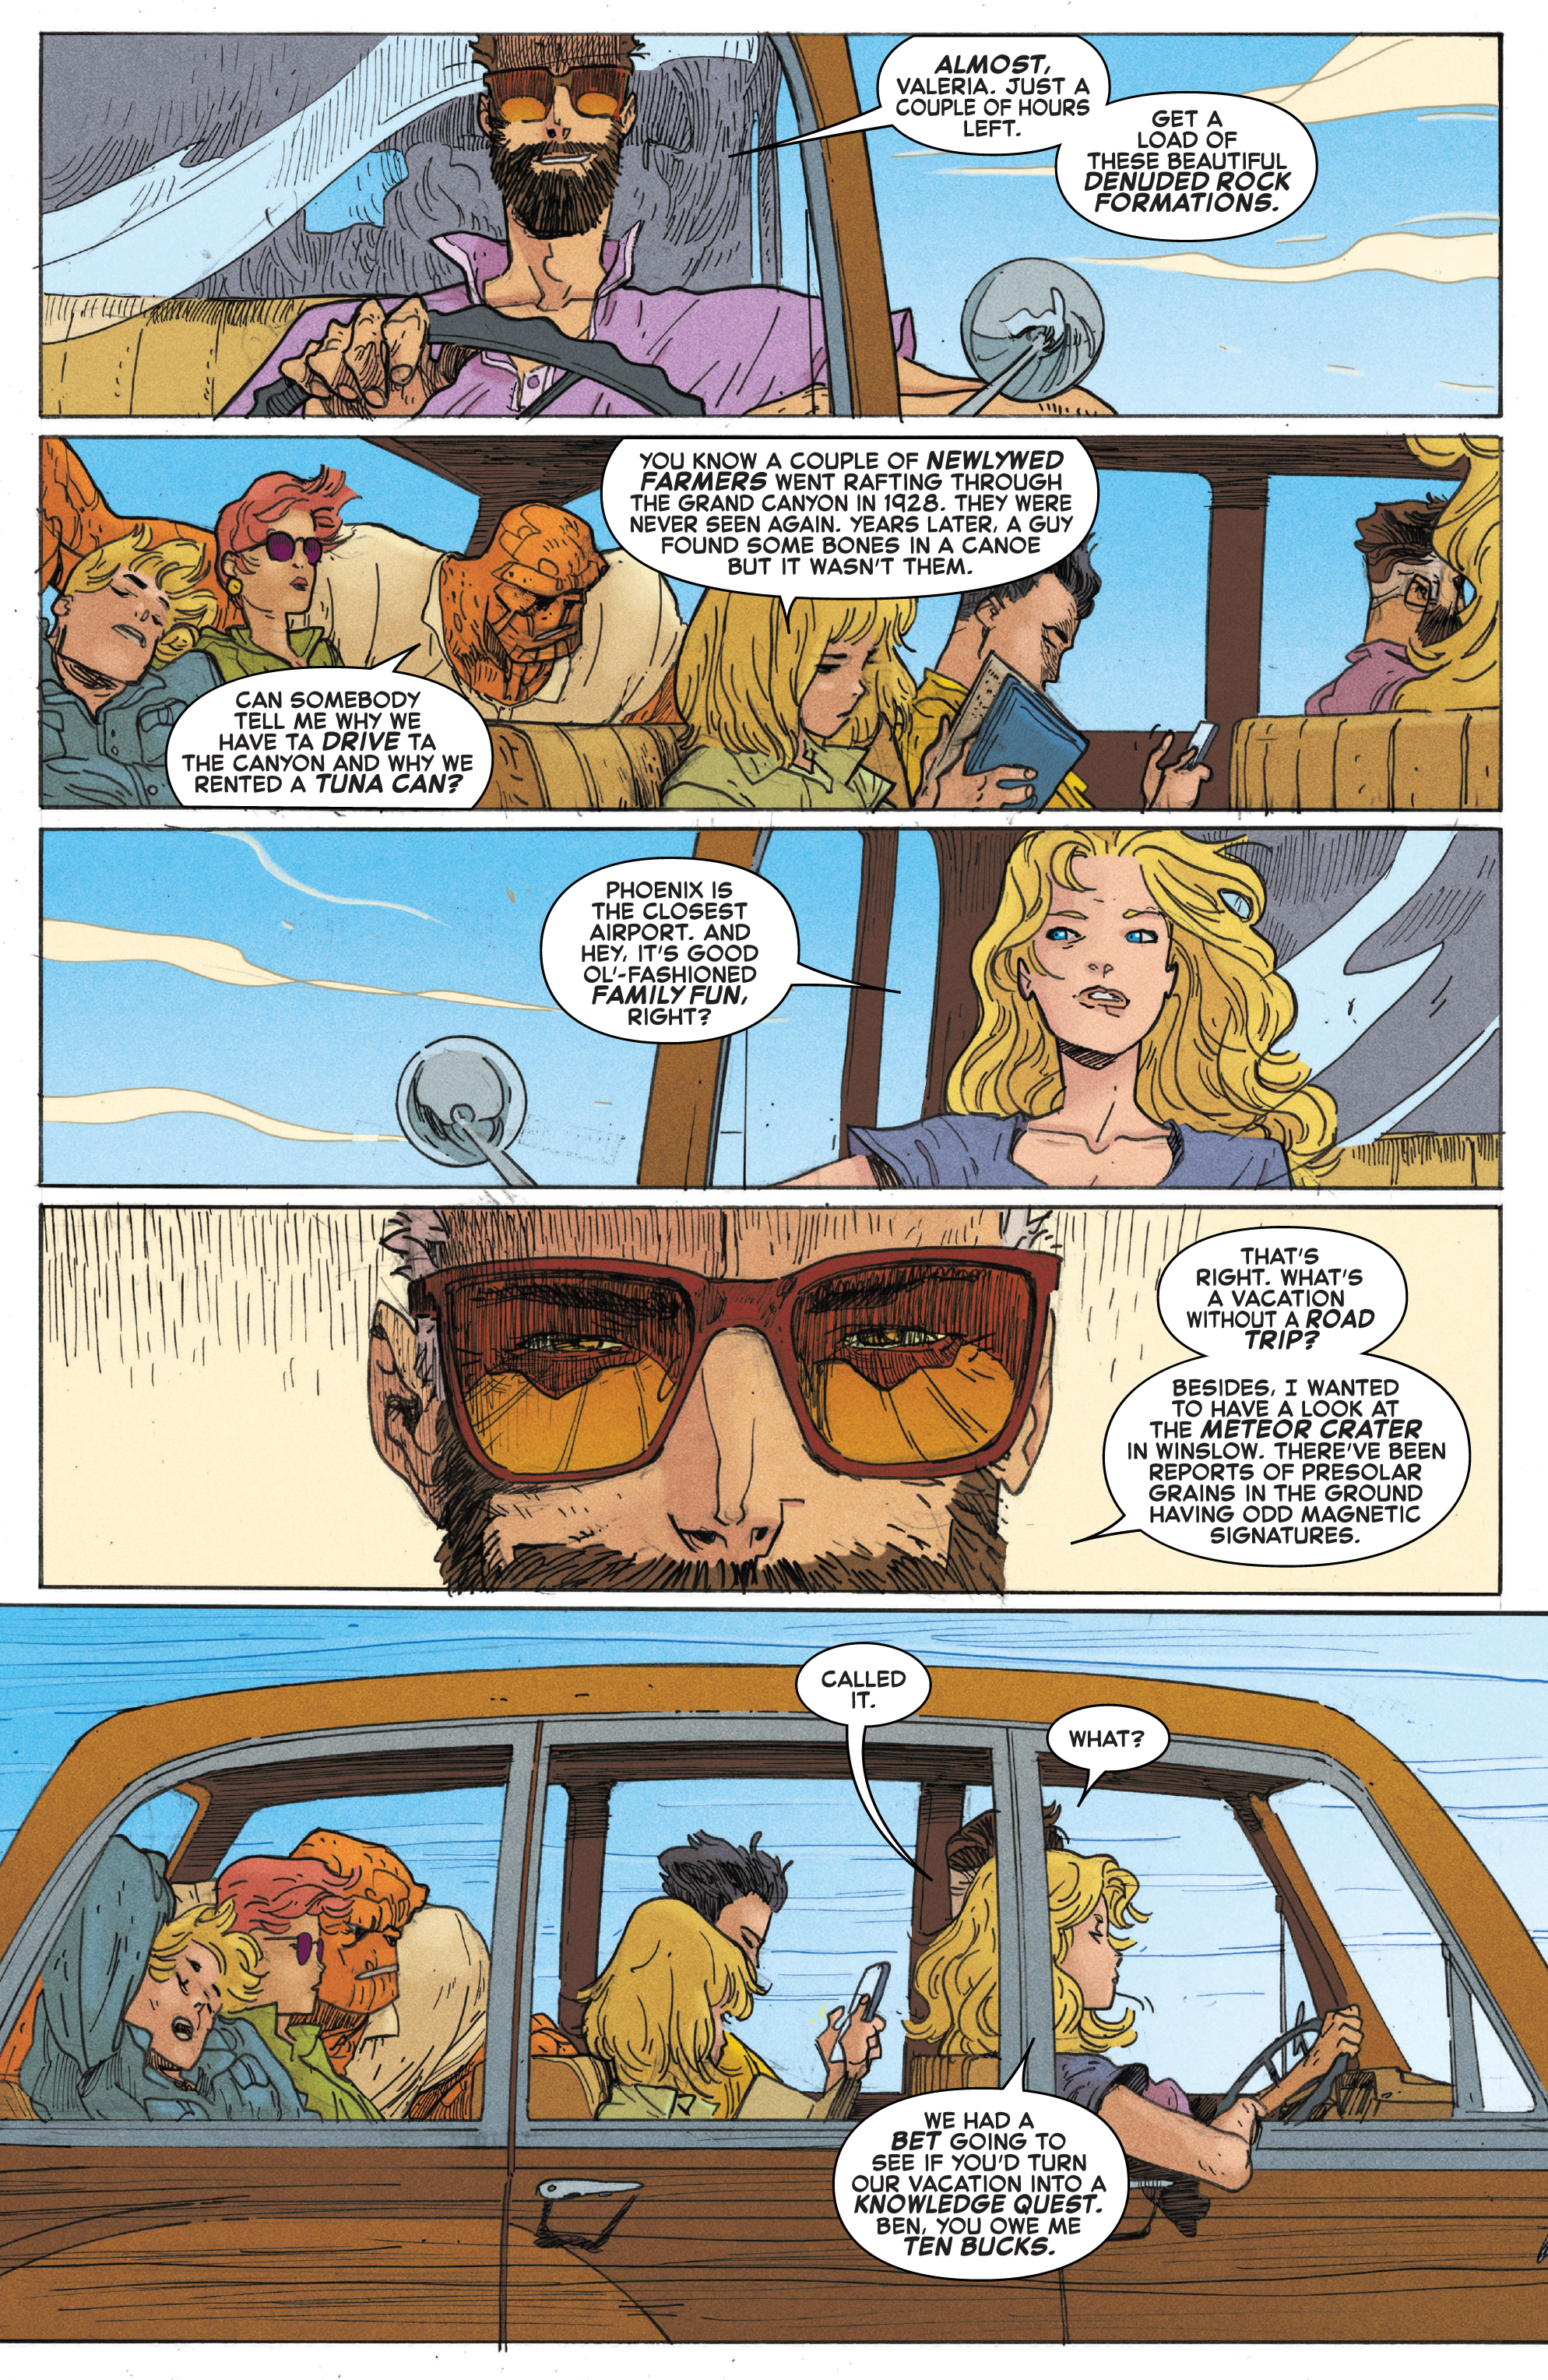 Fantastic Four: Road Trip (2020): Chapter 1 - Page 4